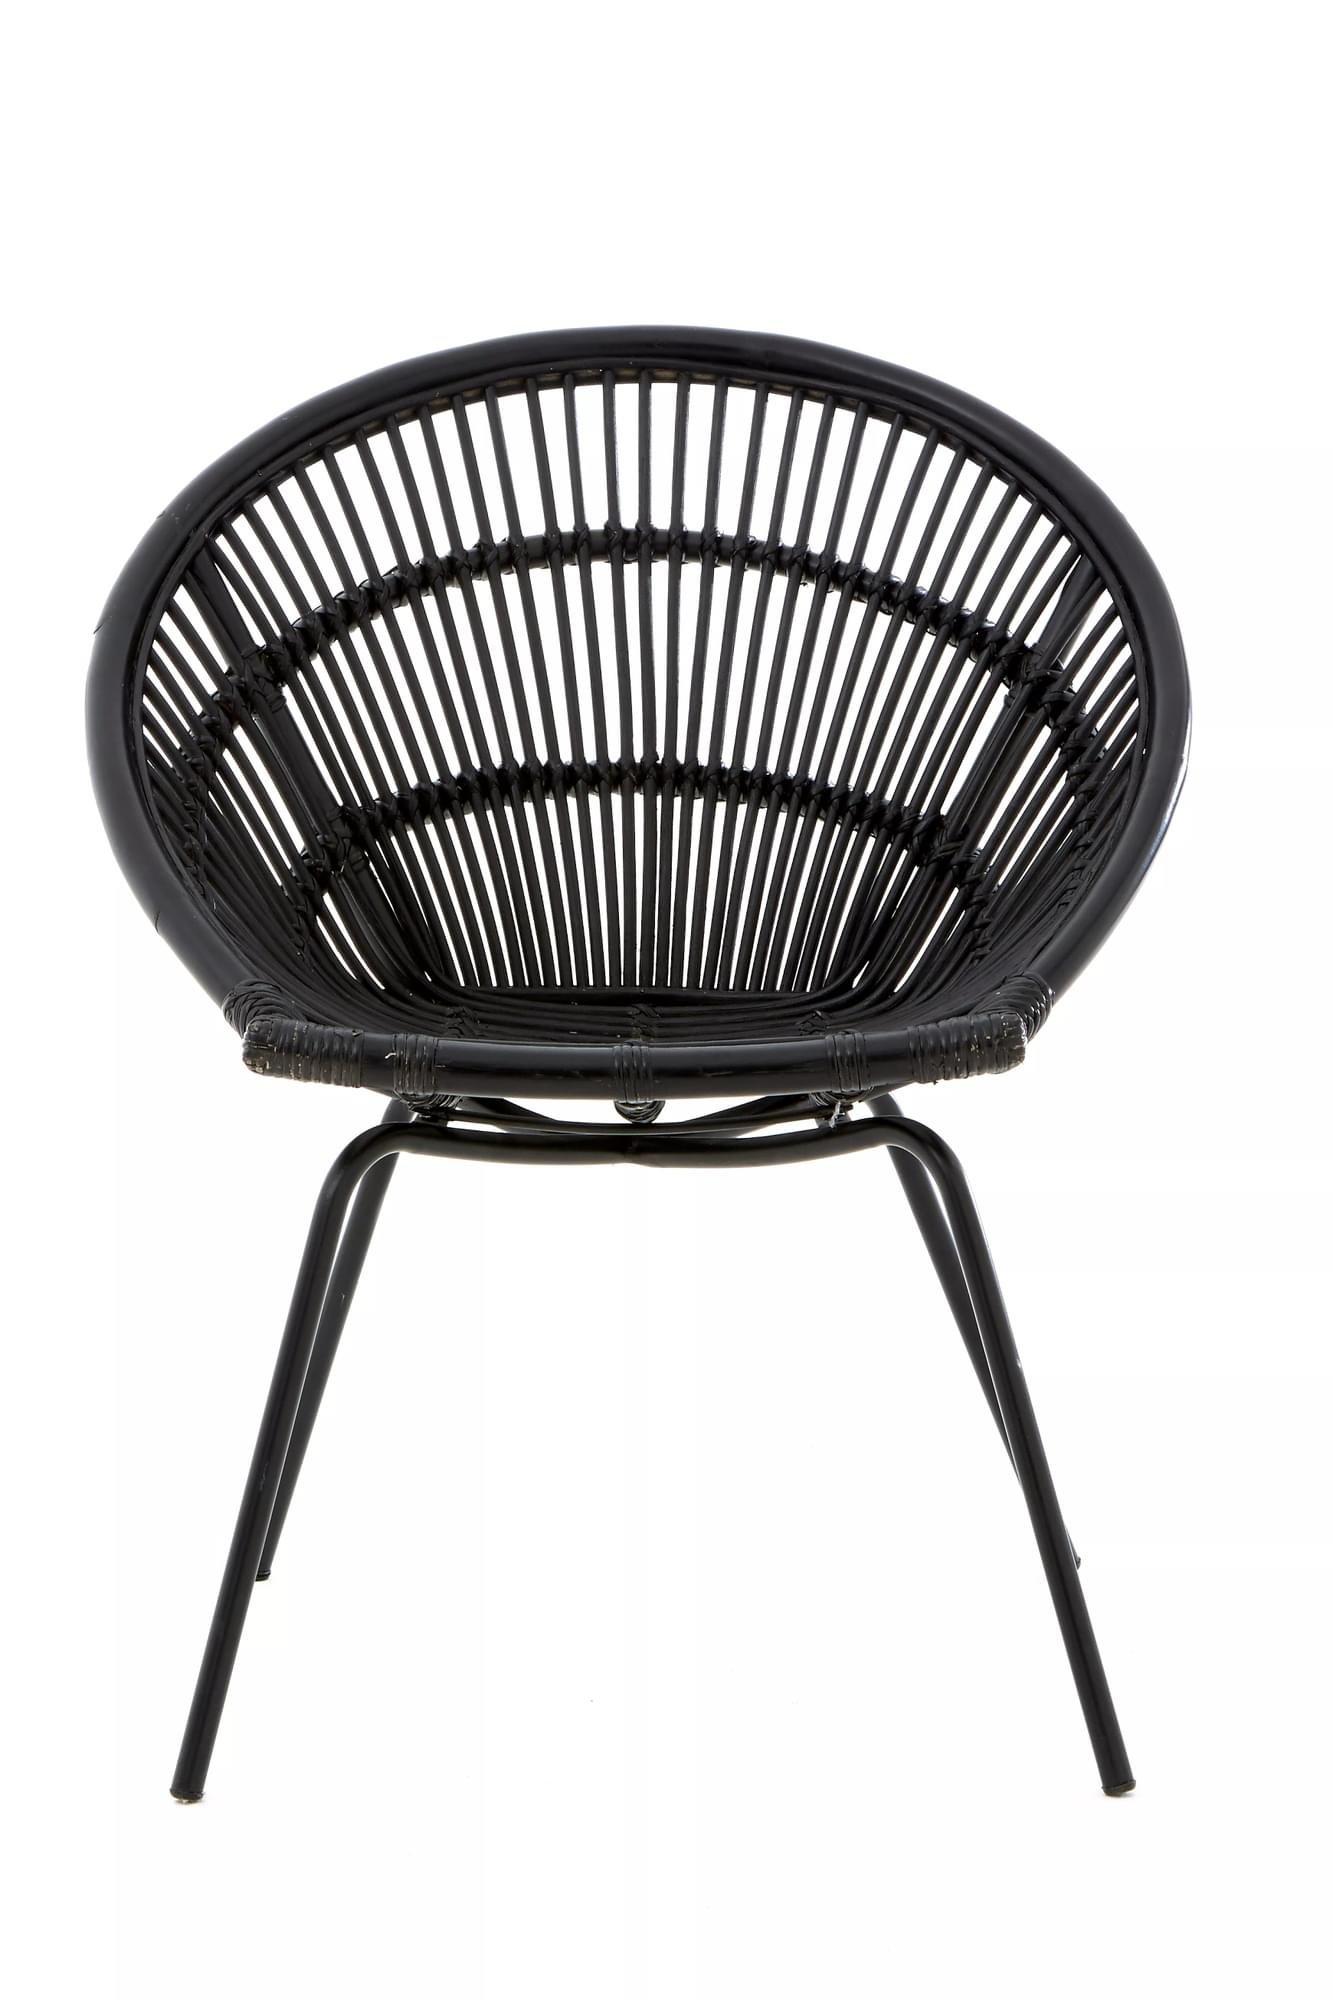 Interiors by Premier Black Washed Natural Rattan Chair, Rustless Rattan Chair, Easy Cleaning Rattan 